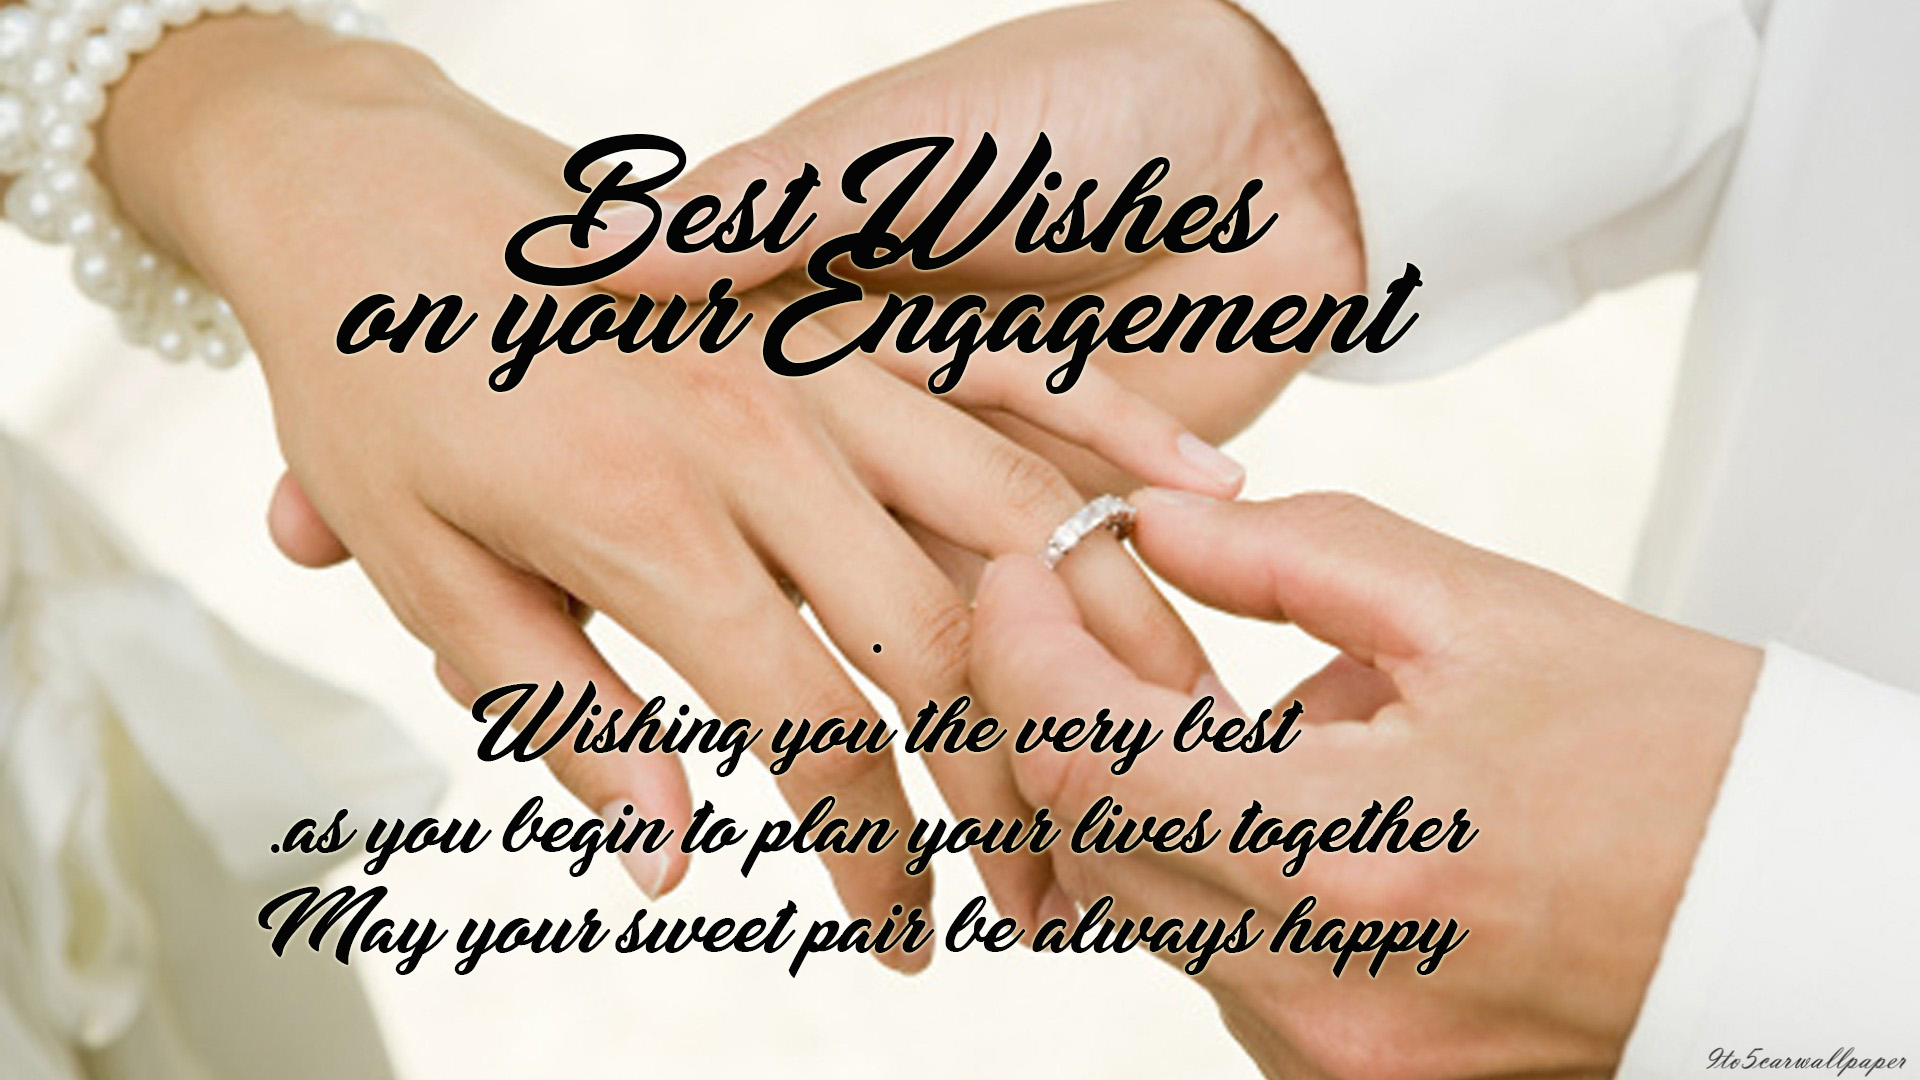 best-wishes-on-your-engagement-quotes-images-posters-2018